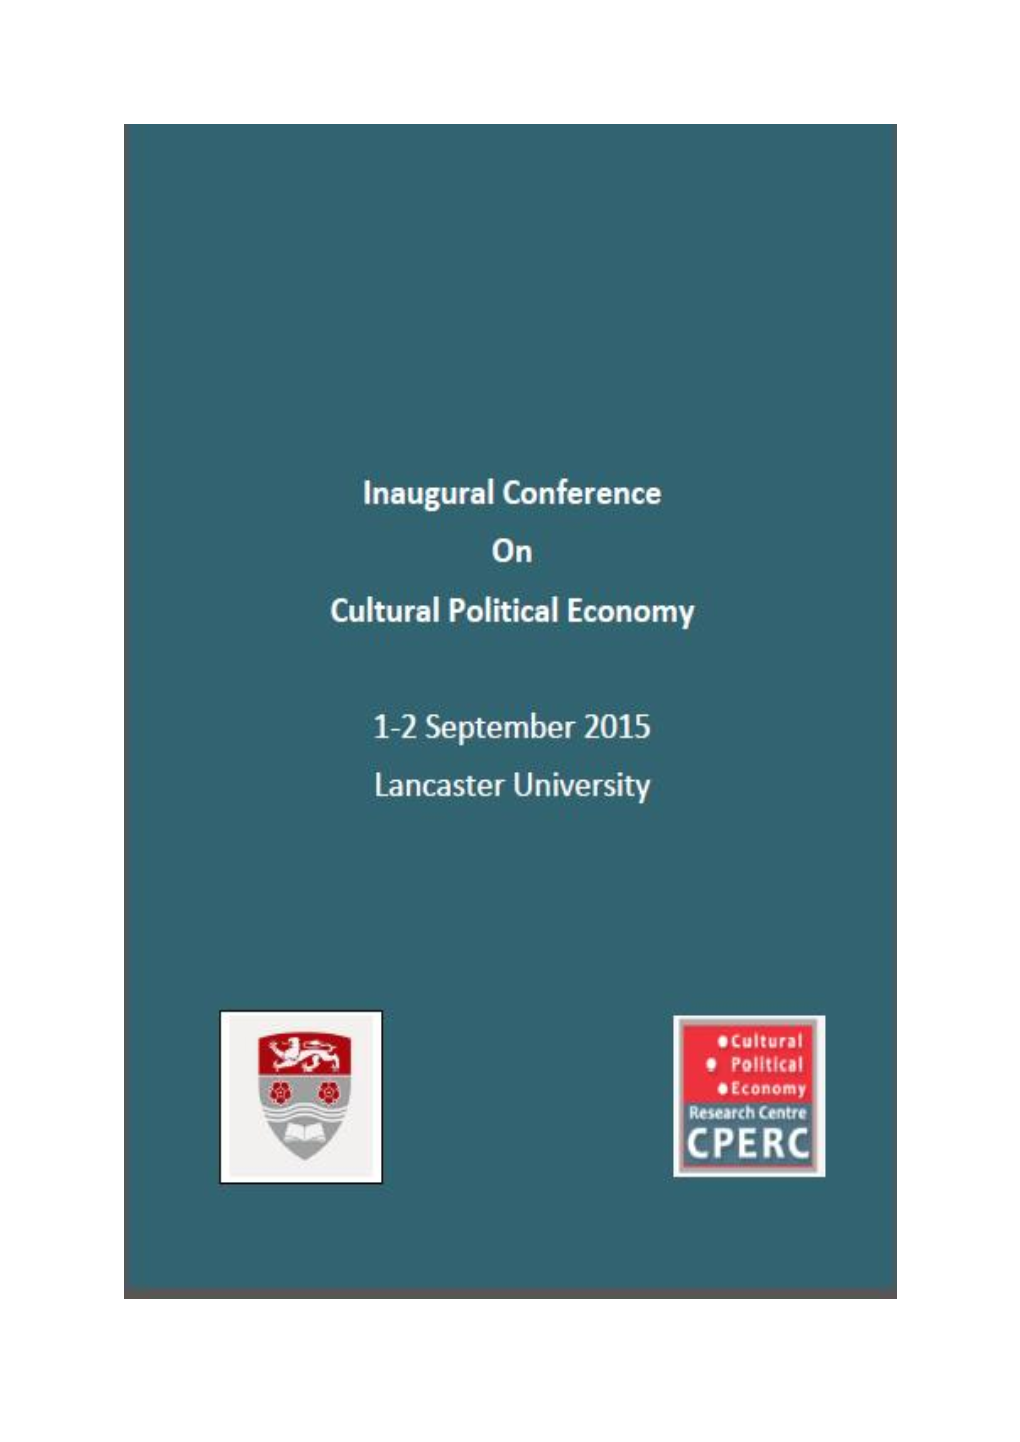 Inaugural Conference on Cultural Political Economy